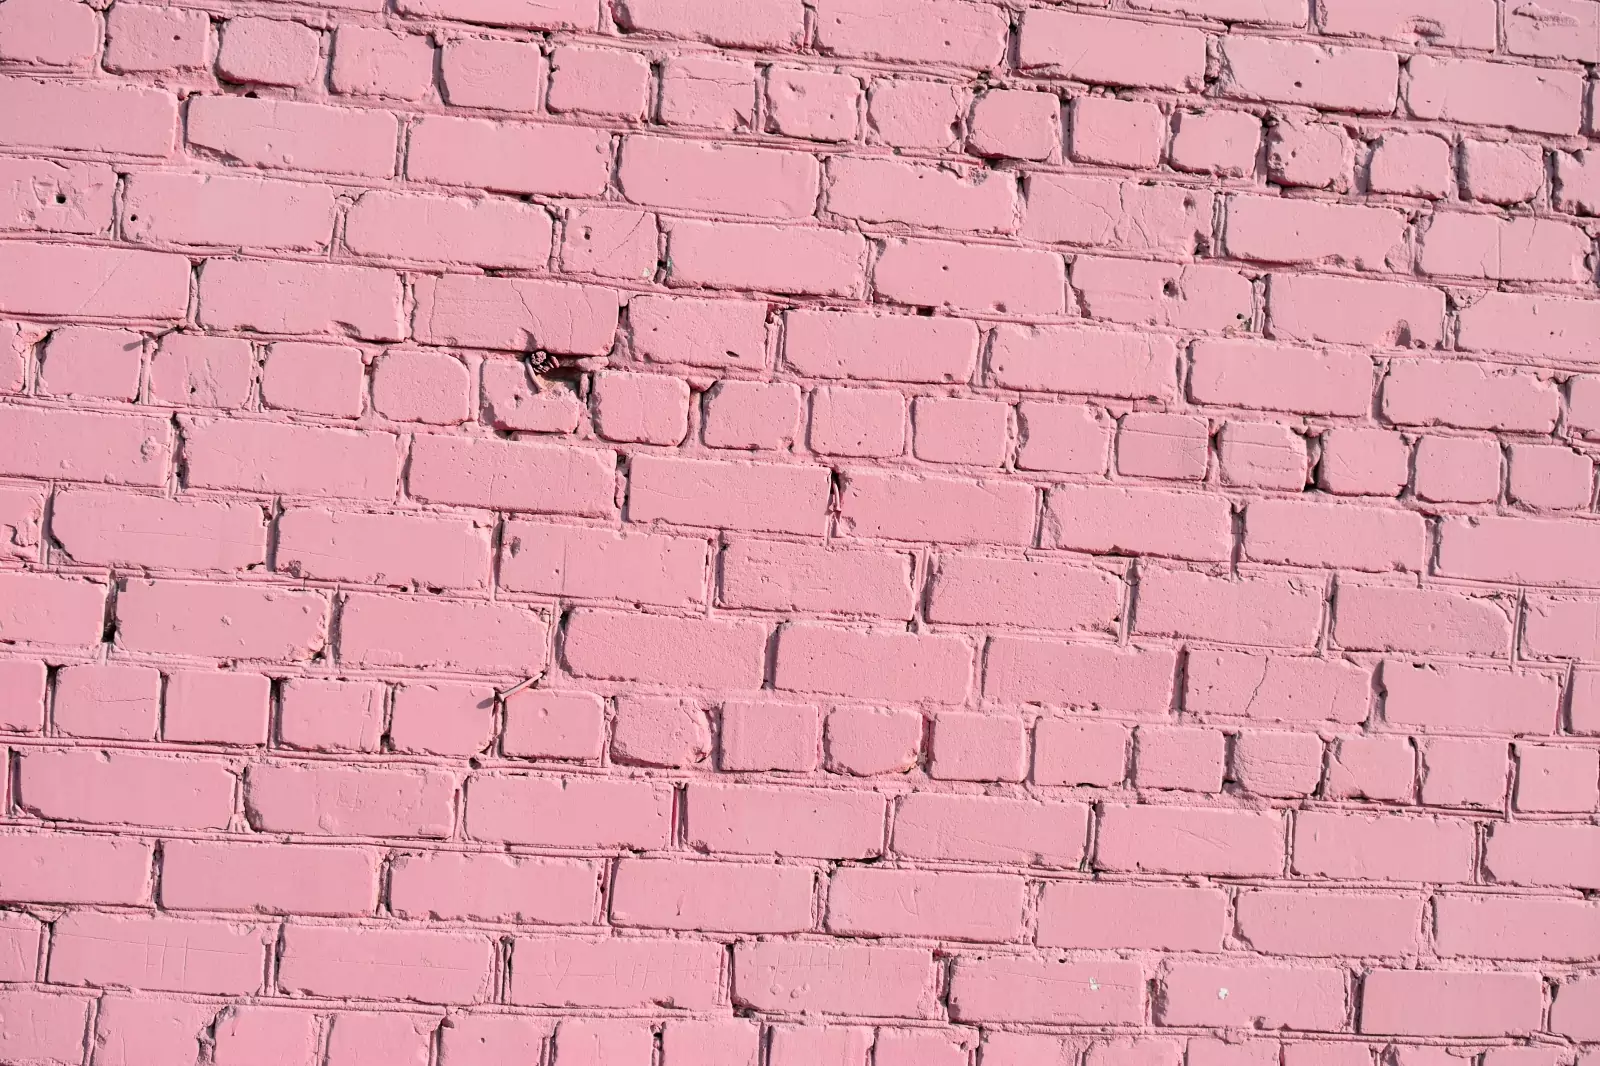 bricks that have been painted pink